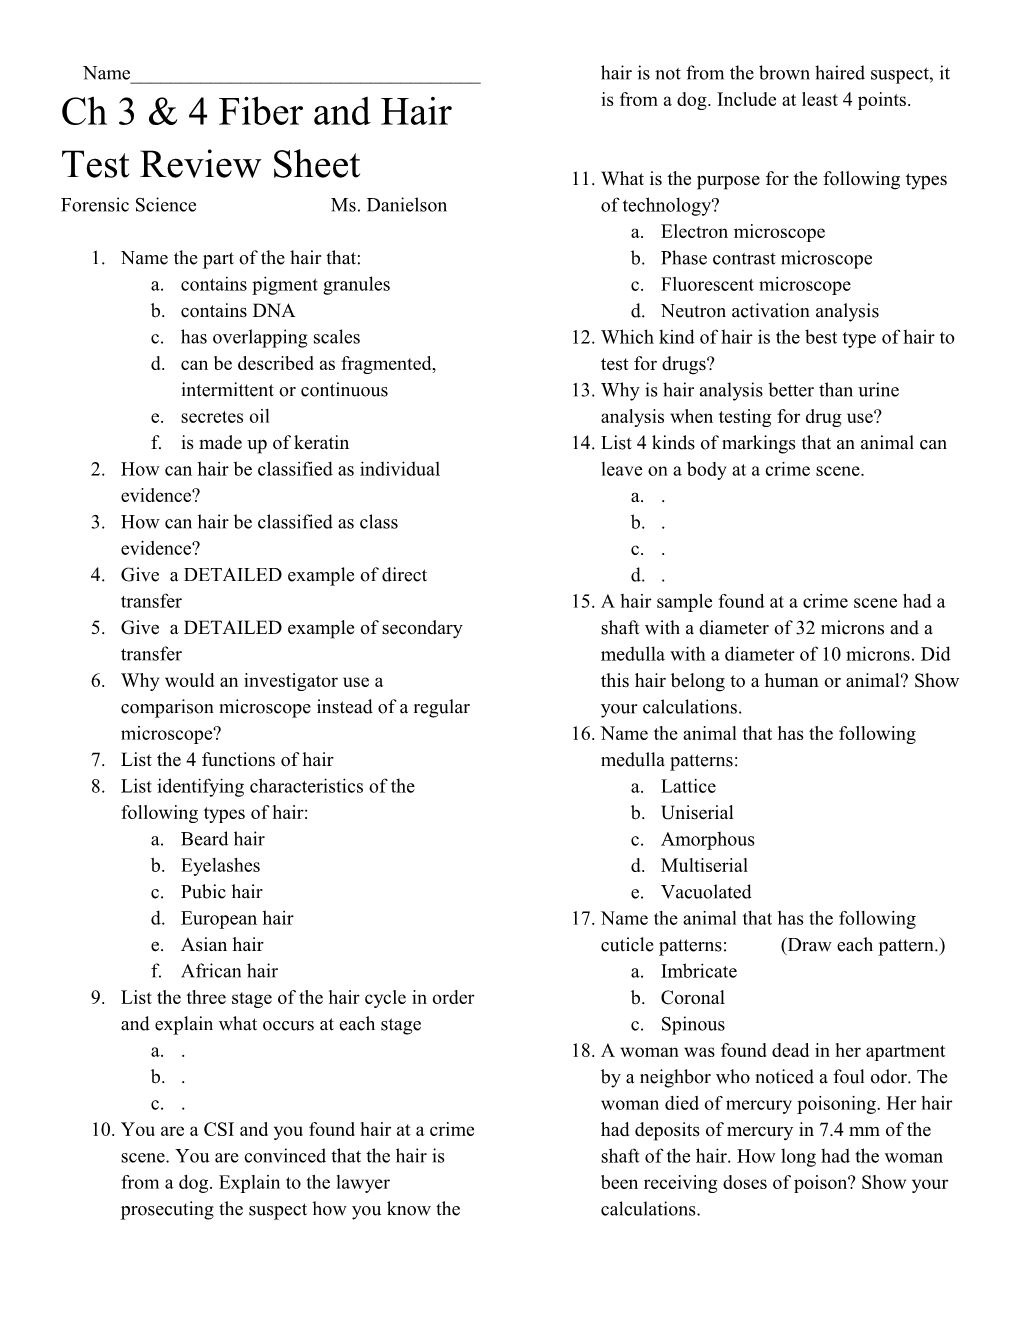 Ch 3 & 4 Fiber and Hair Test Review Sheet